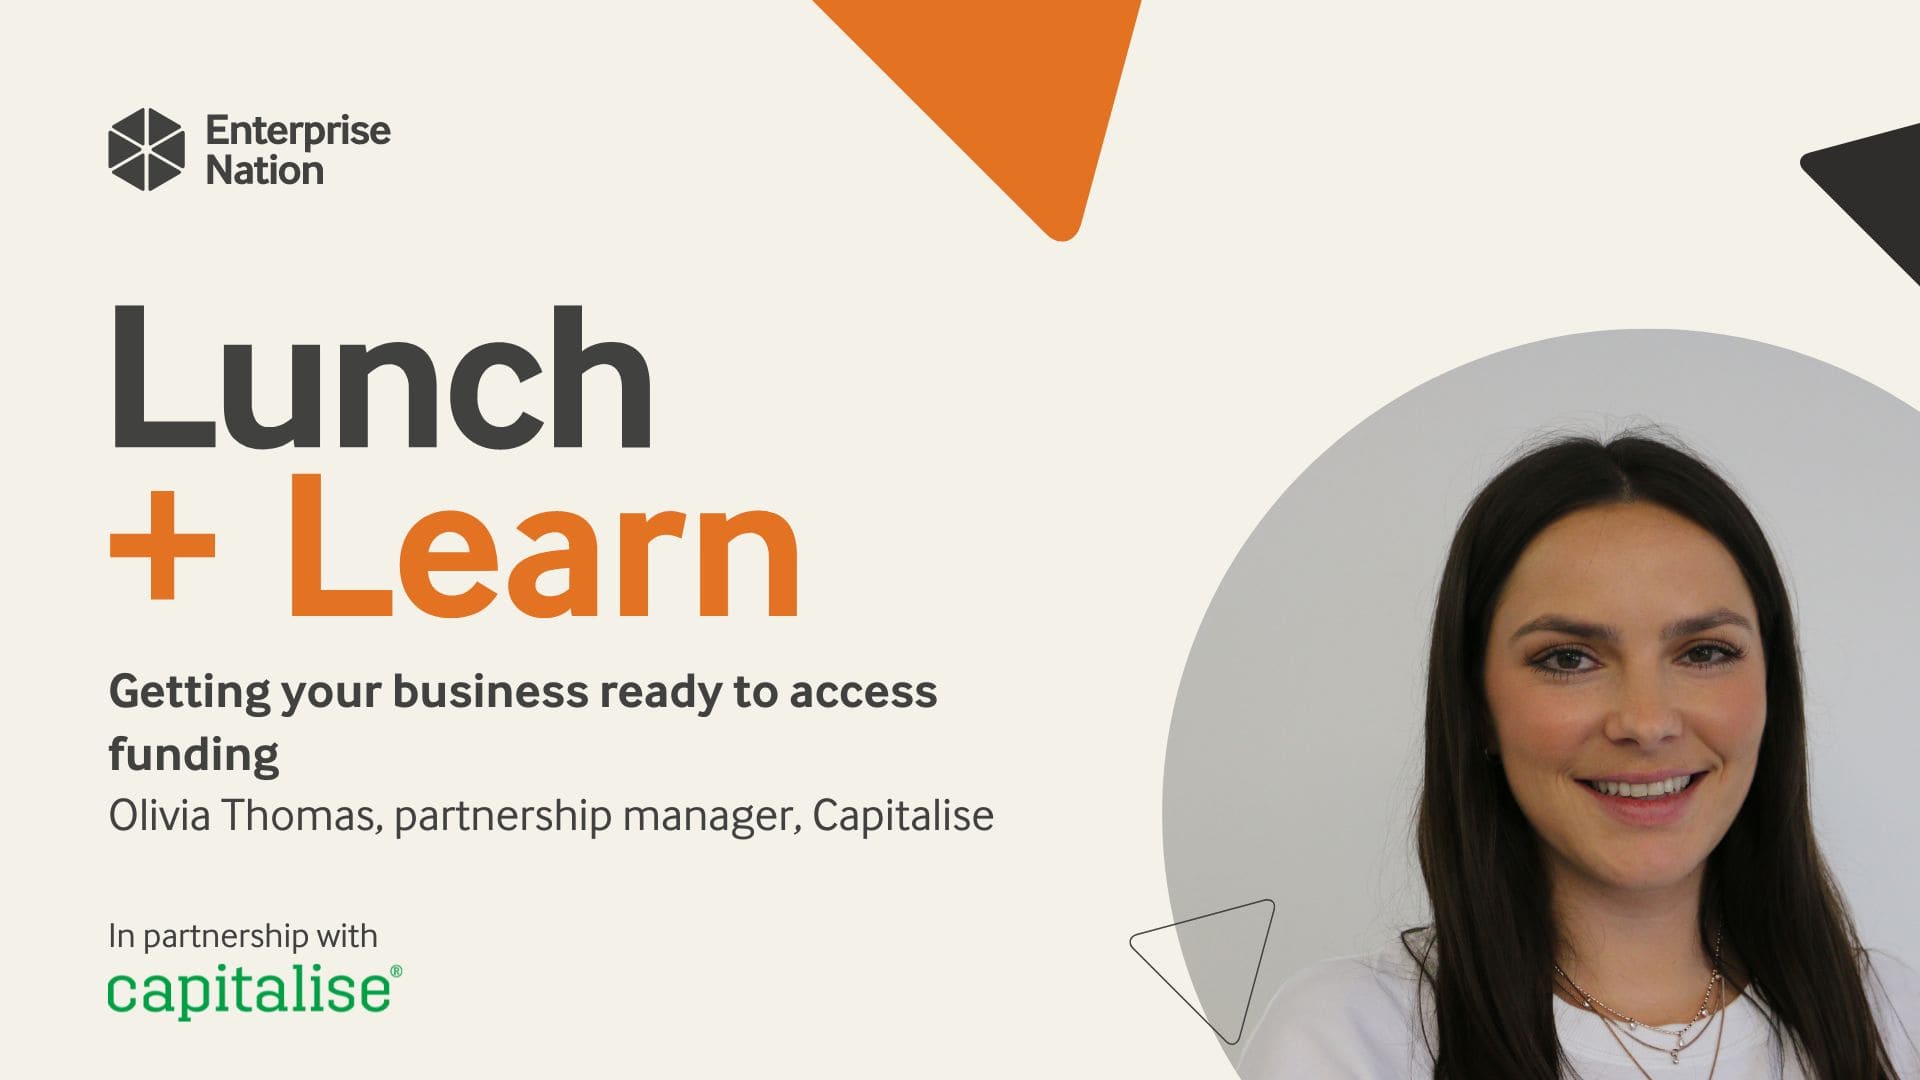 Lunch and Learn: Getting your business ready to access funding